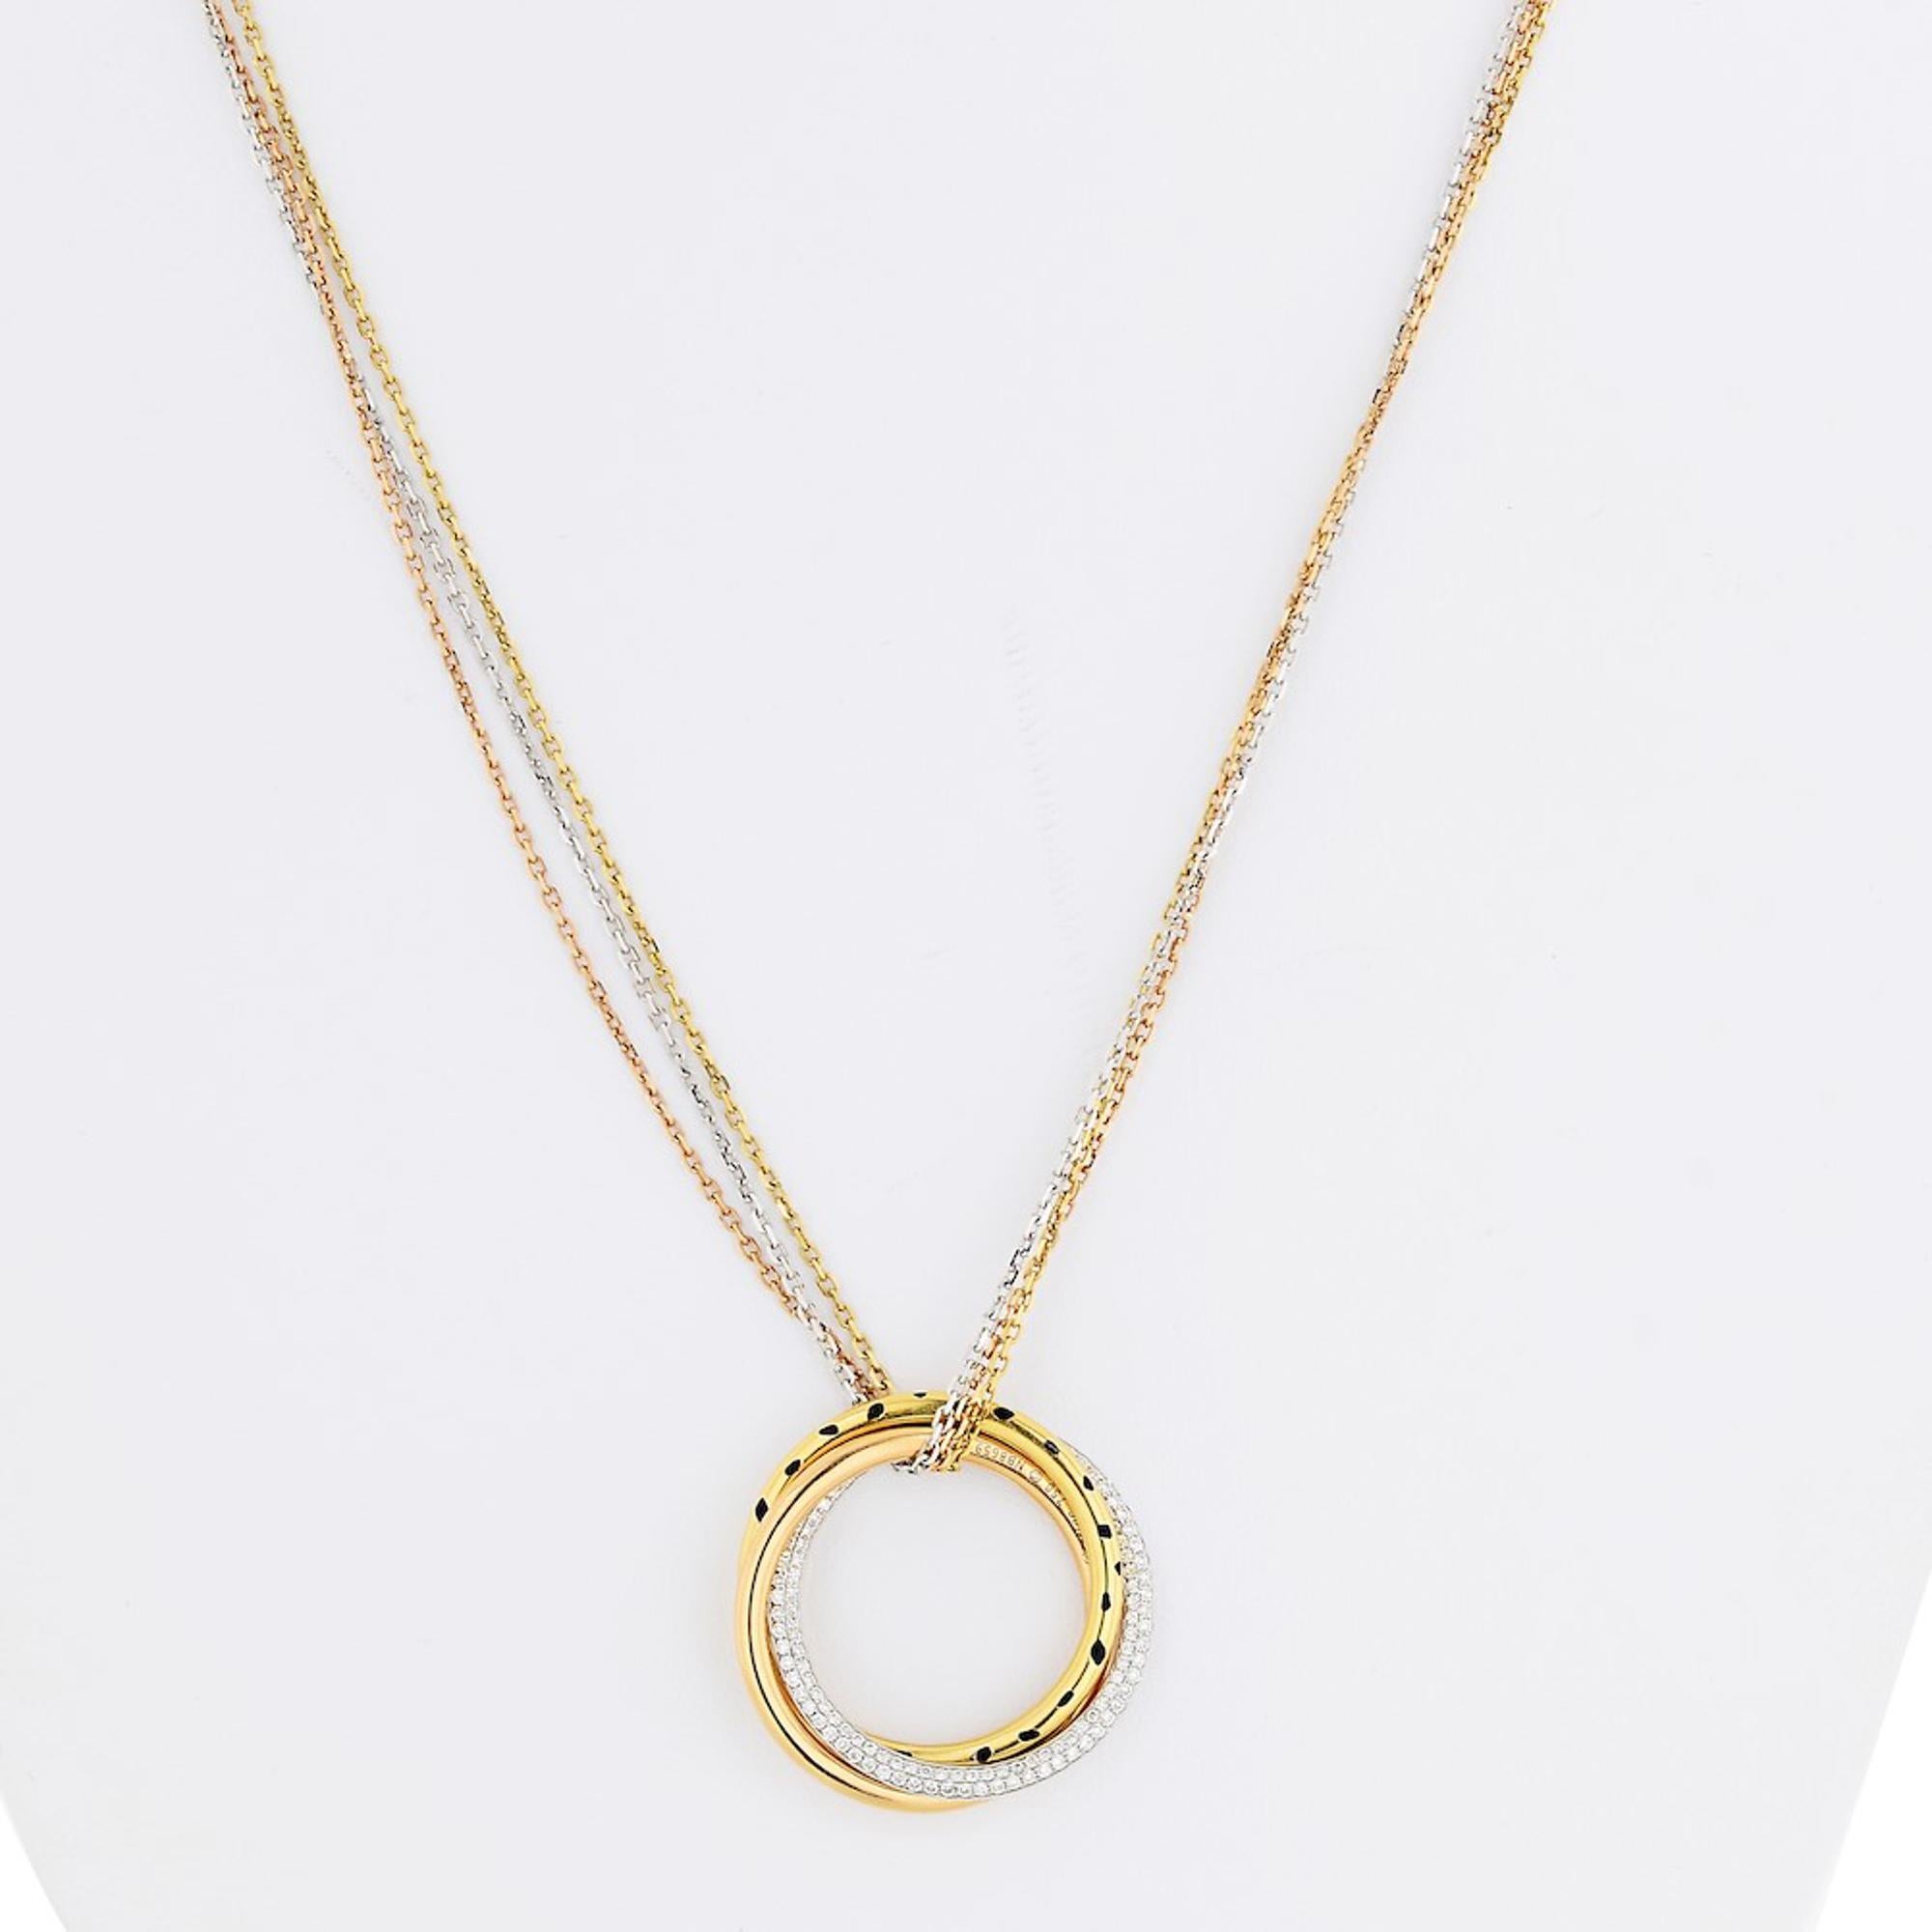 18k white, yellow and pink gold Cartier pendant necklace from the trinity collection. This statement piece features interlocking tricolor rings embellished with black lacquer and accented with round brilliant cut diamonds weighing approx. 0.88cts in